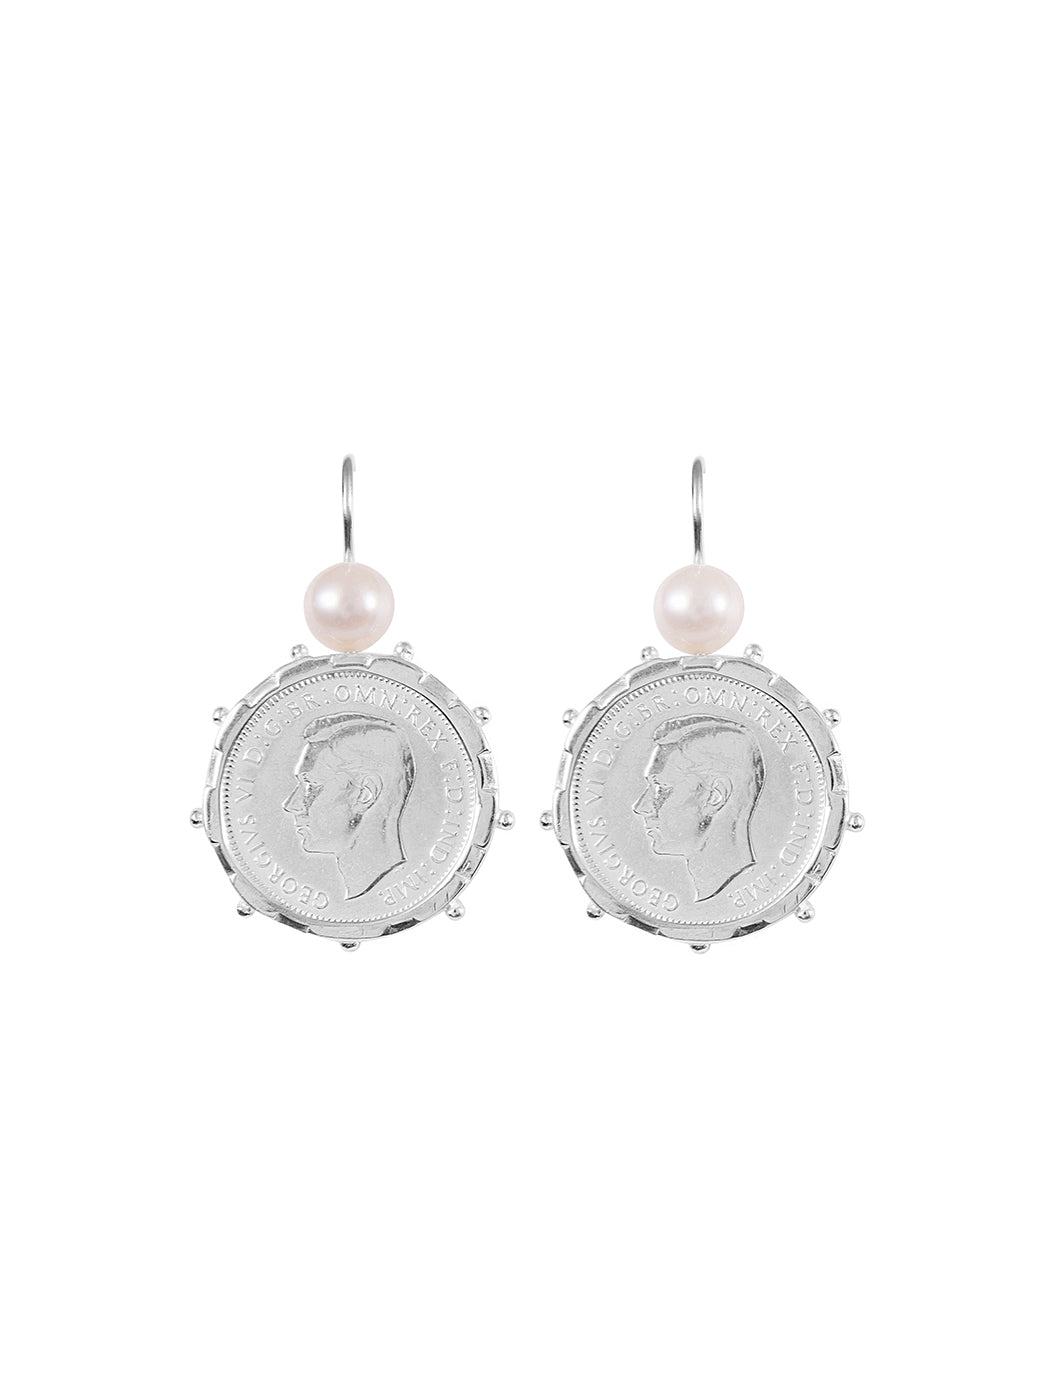 Fiorina Jewellery Silver Encased Shilling Coin Earrings Pearl Highlights